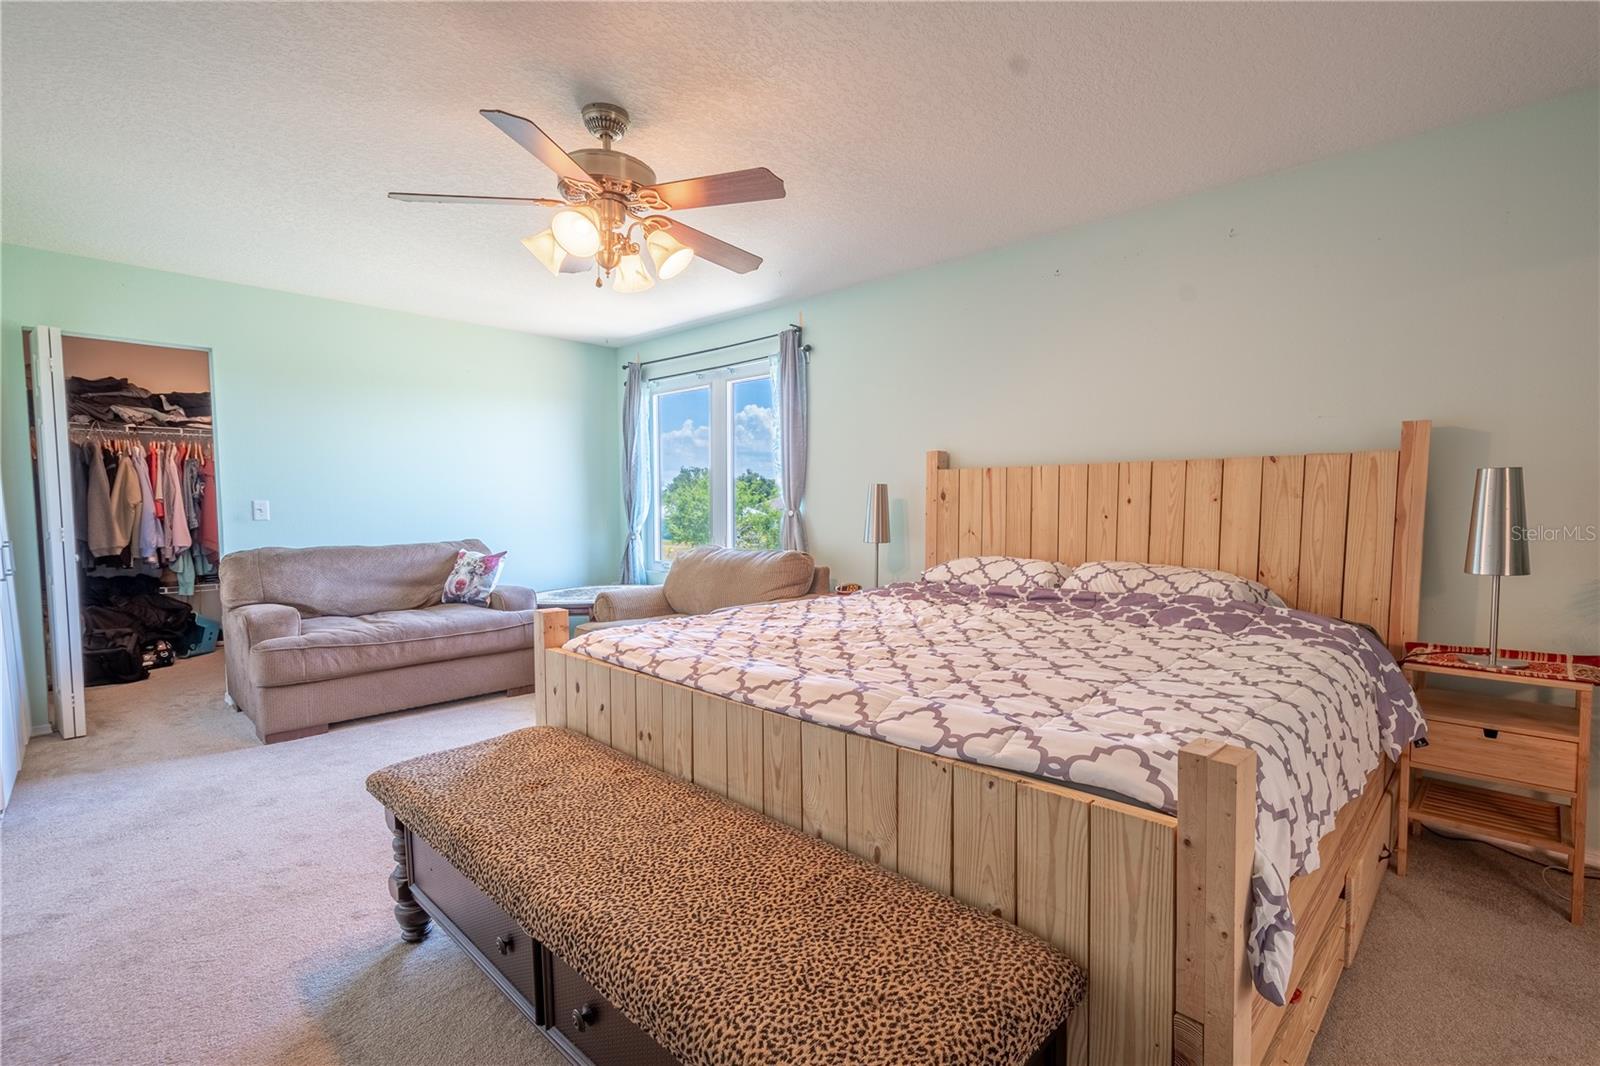 The primary bedroom is spacious enough to include all of your furniture, including a king-size bed.